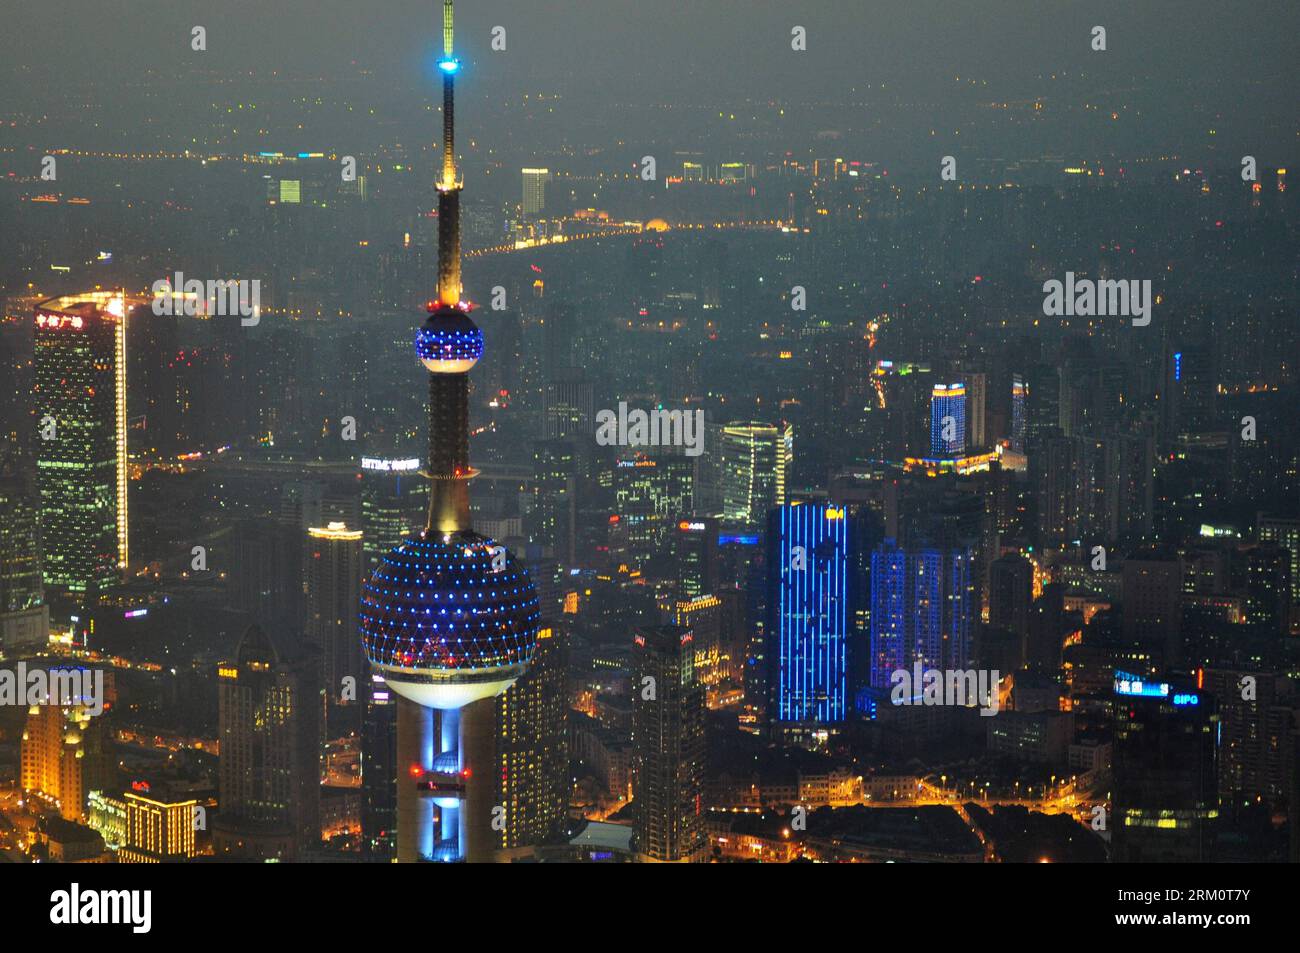 SHANGHAI, 2013 - The Oriental Pearl TV Tower is illuminated in blue light to mark the World Autism Awareness Day in Shanghai, east China, April 2, 2013. Xinhua/He Youbao hdt CHINA-SHANGHAI-WORLD AUTISM AWARENESS DAY CN PUBLICATIONxNOTxINxCHN Stock Photo